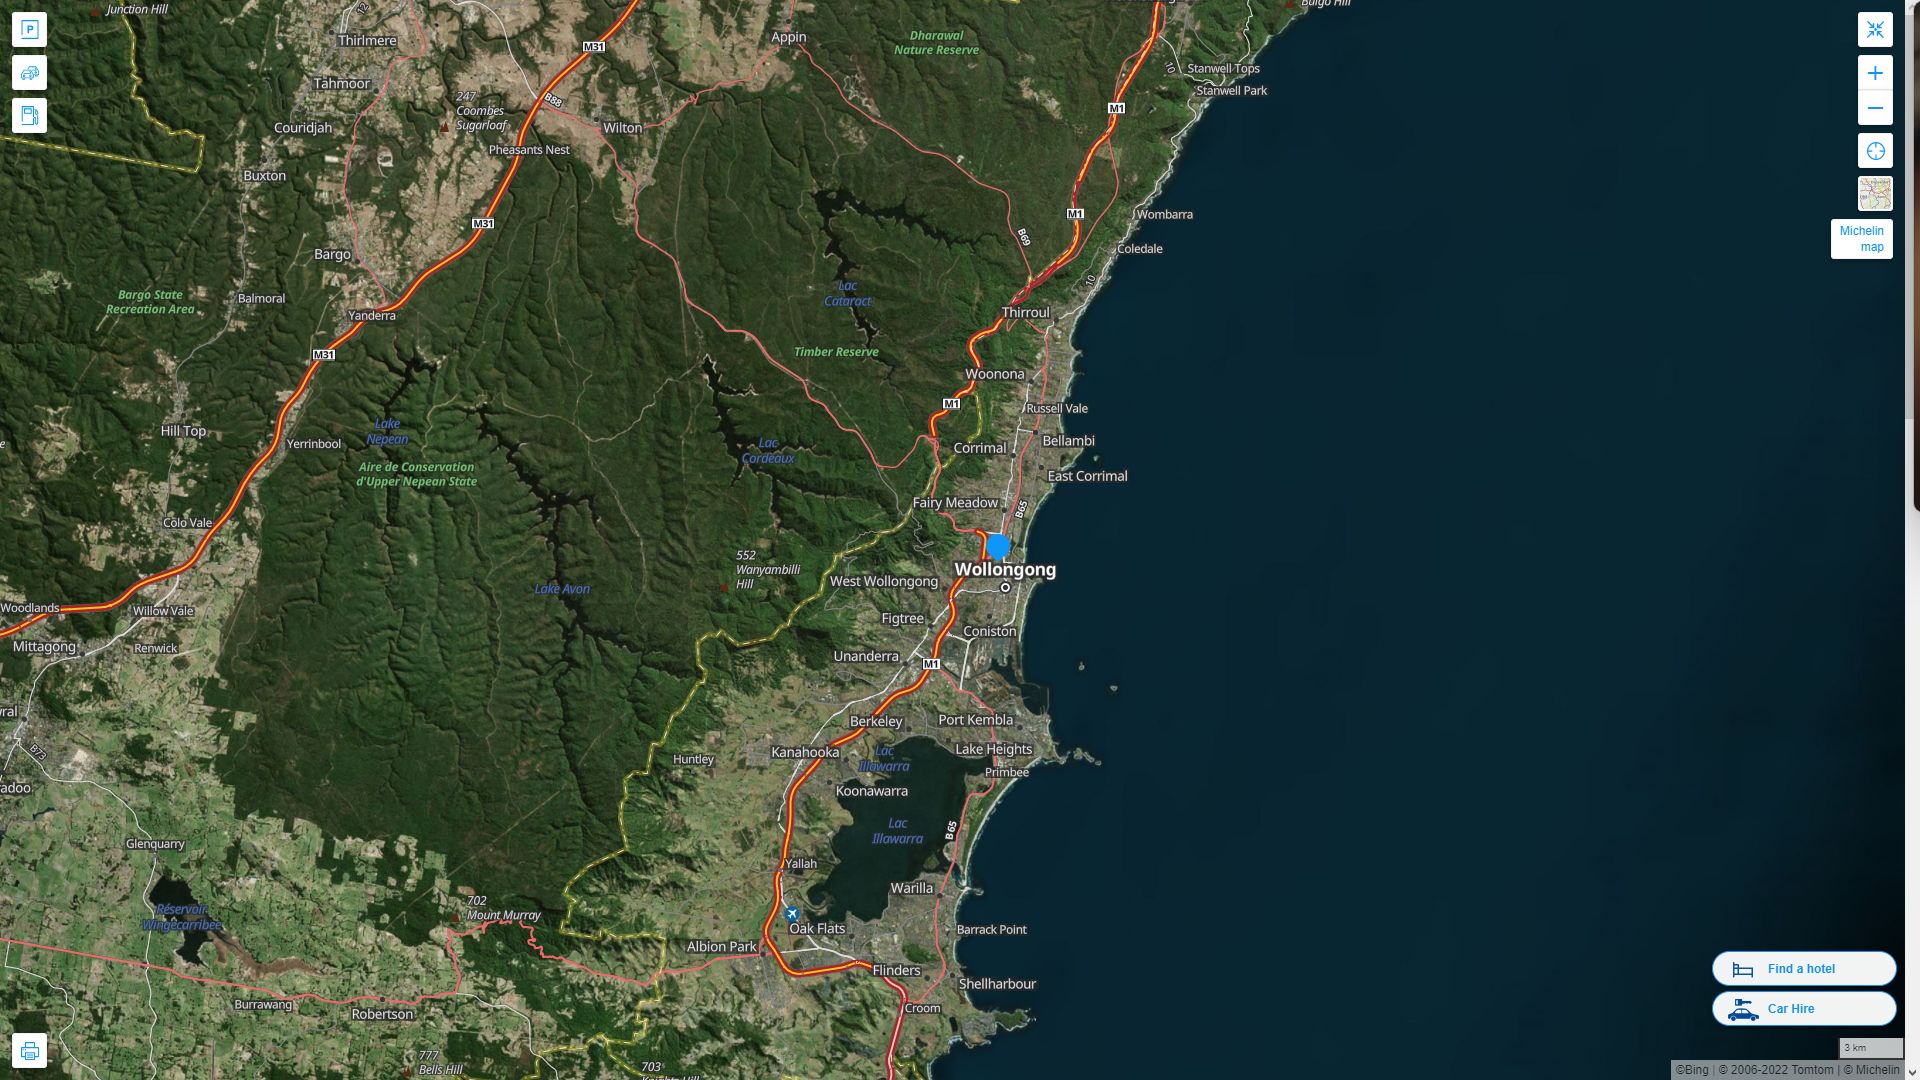 Wollongong Highway and Road Map with Satellite View